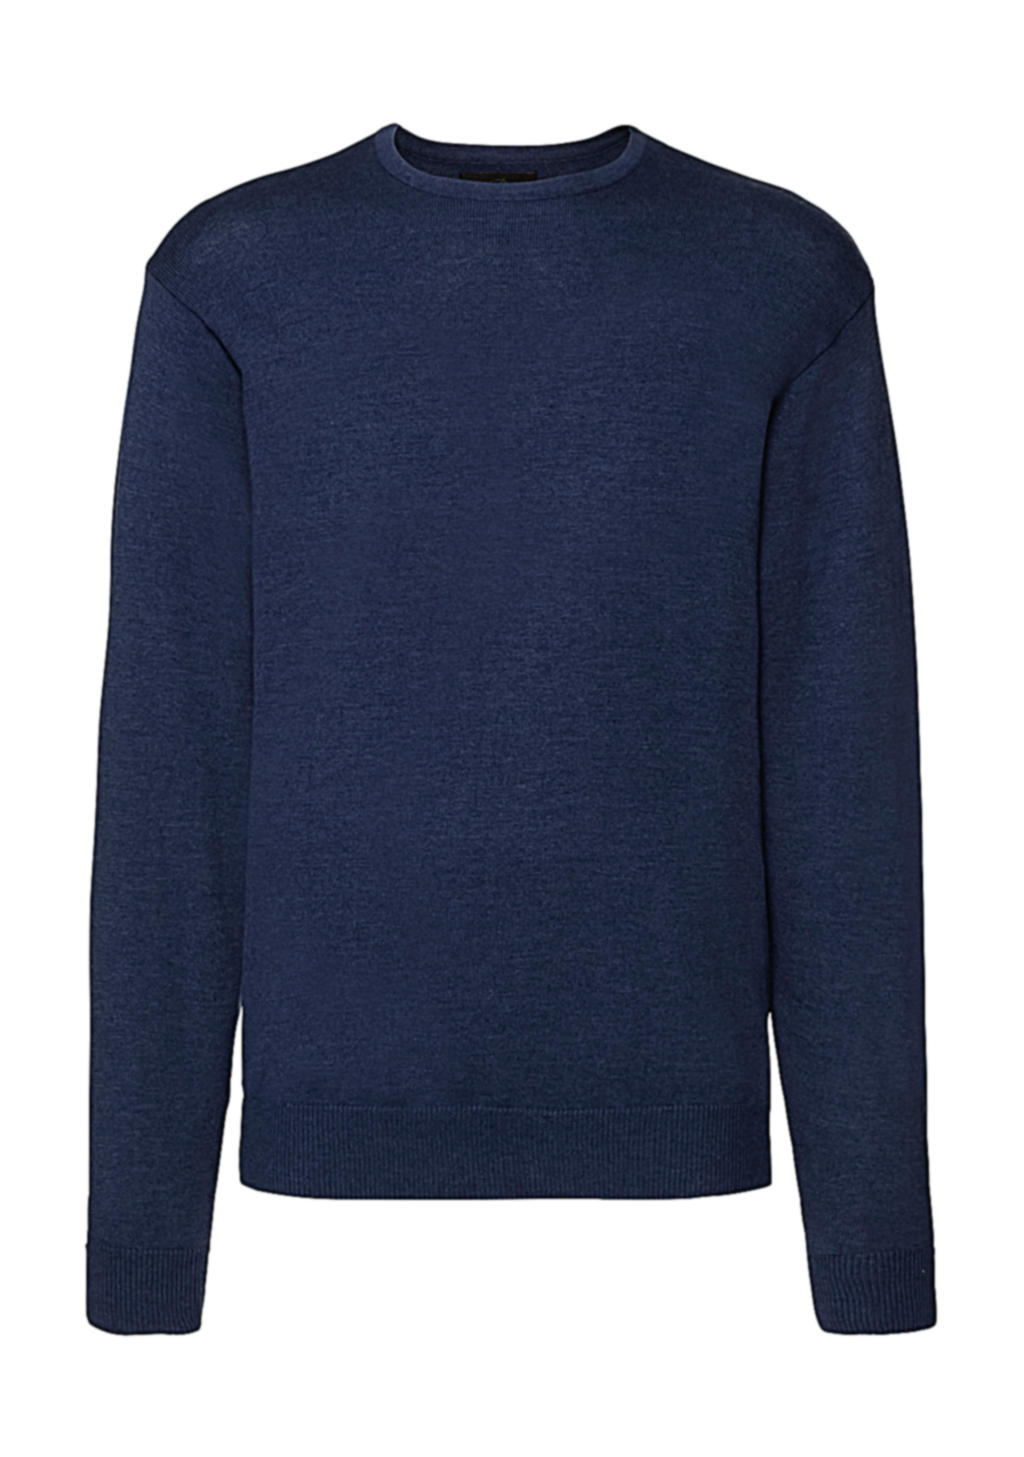  Mens Crew Neck Knitted Pullover in Farbe Denim Marl